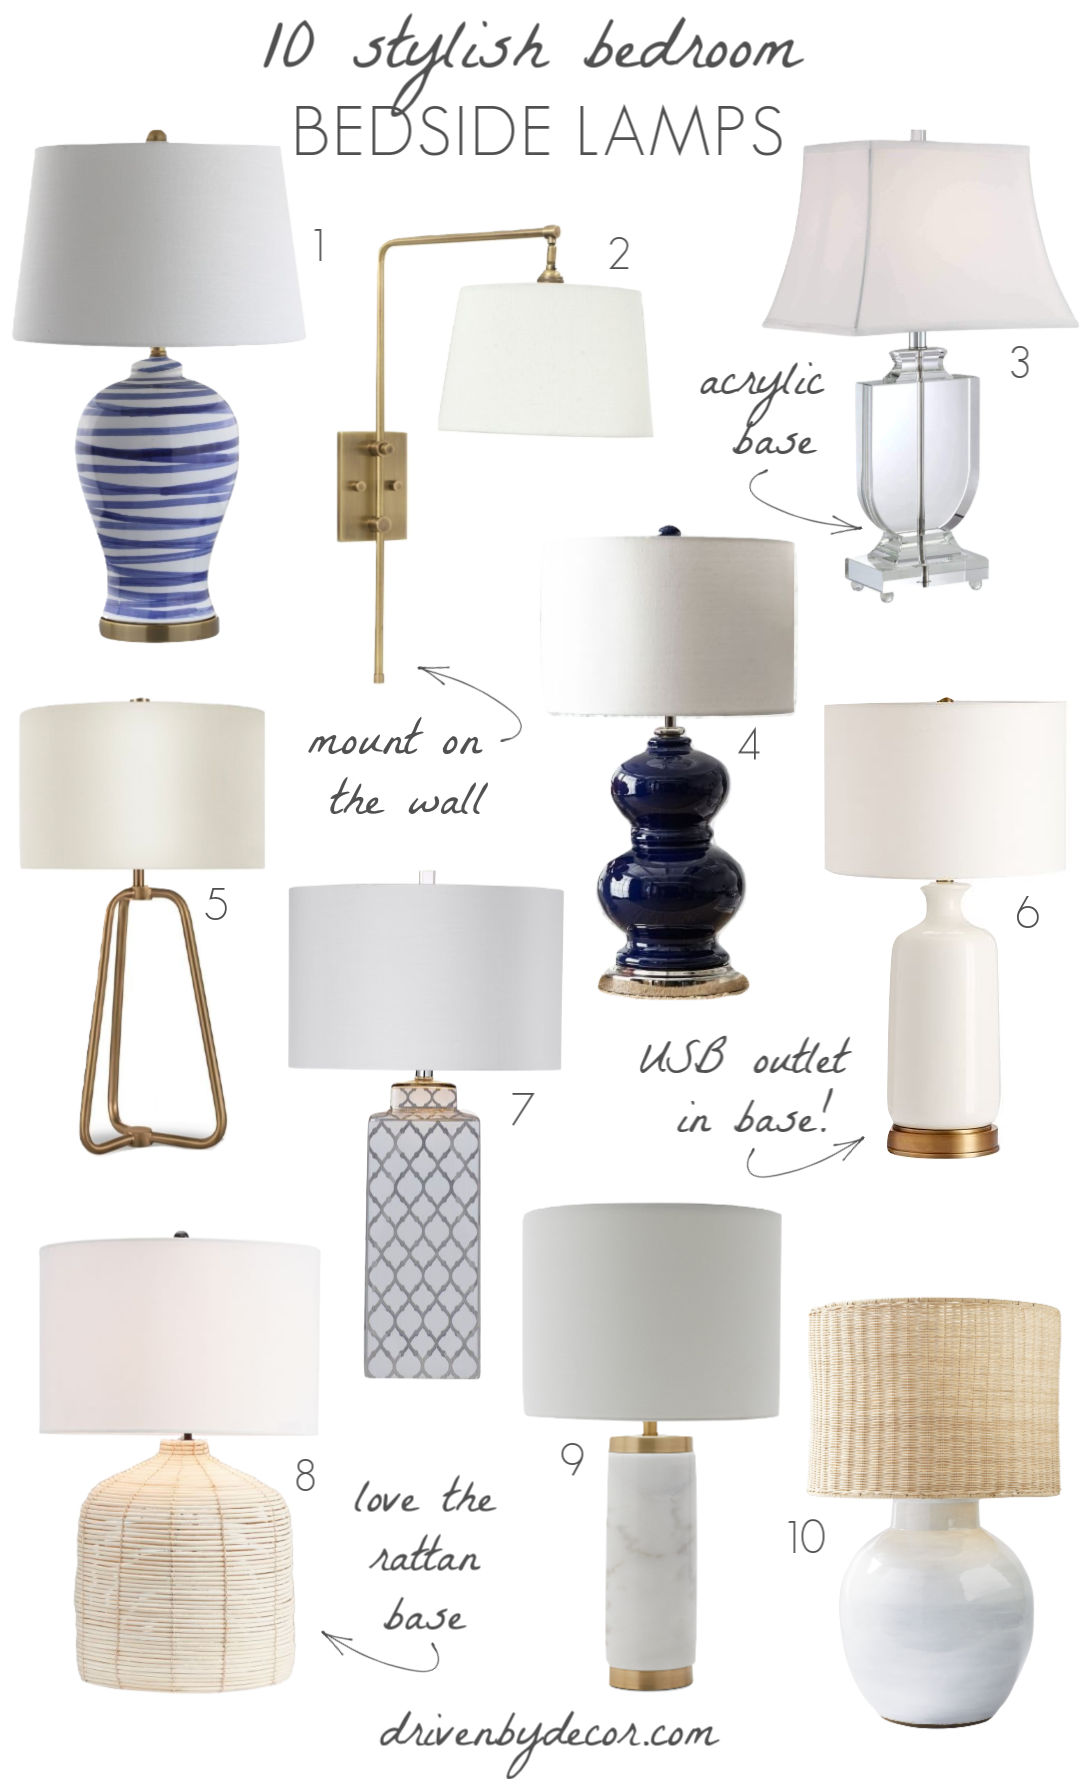 Love all of these bedroom lights - such stylish bedside lamps!